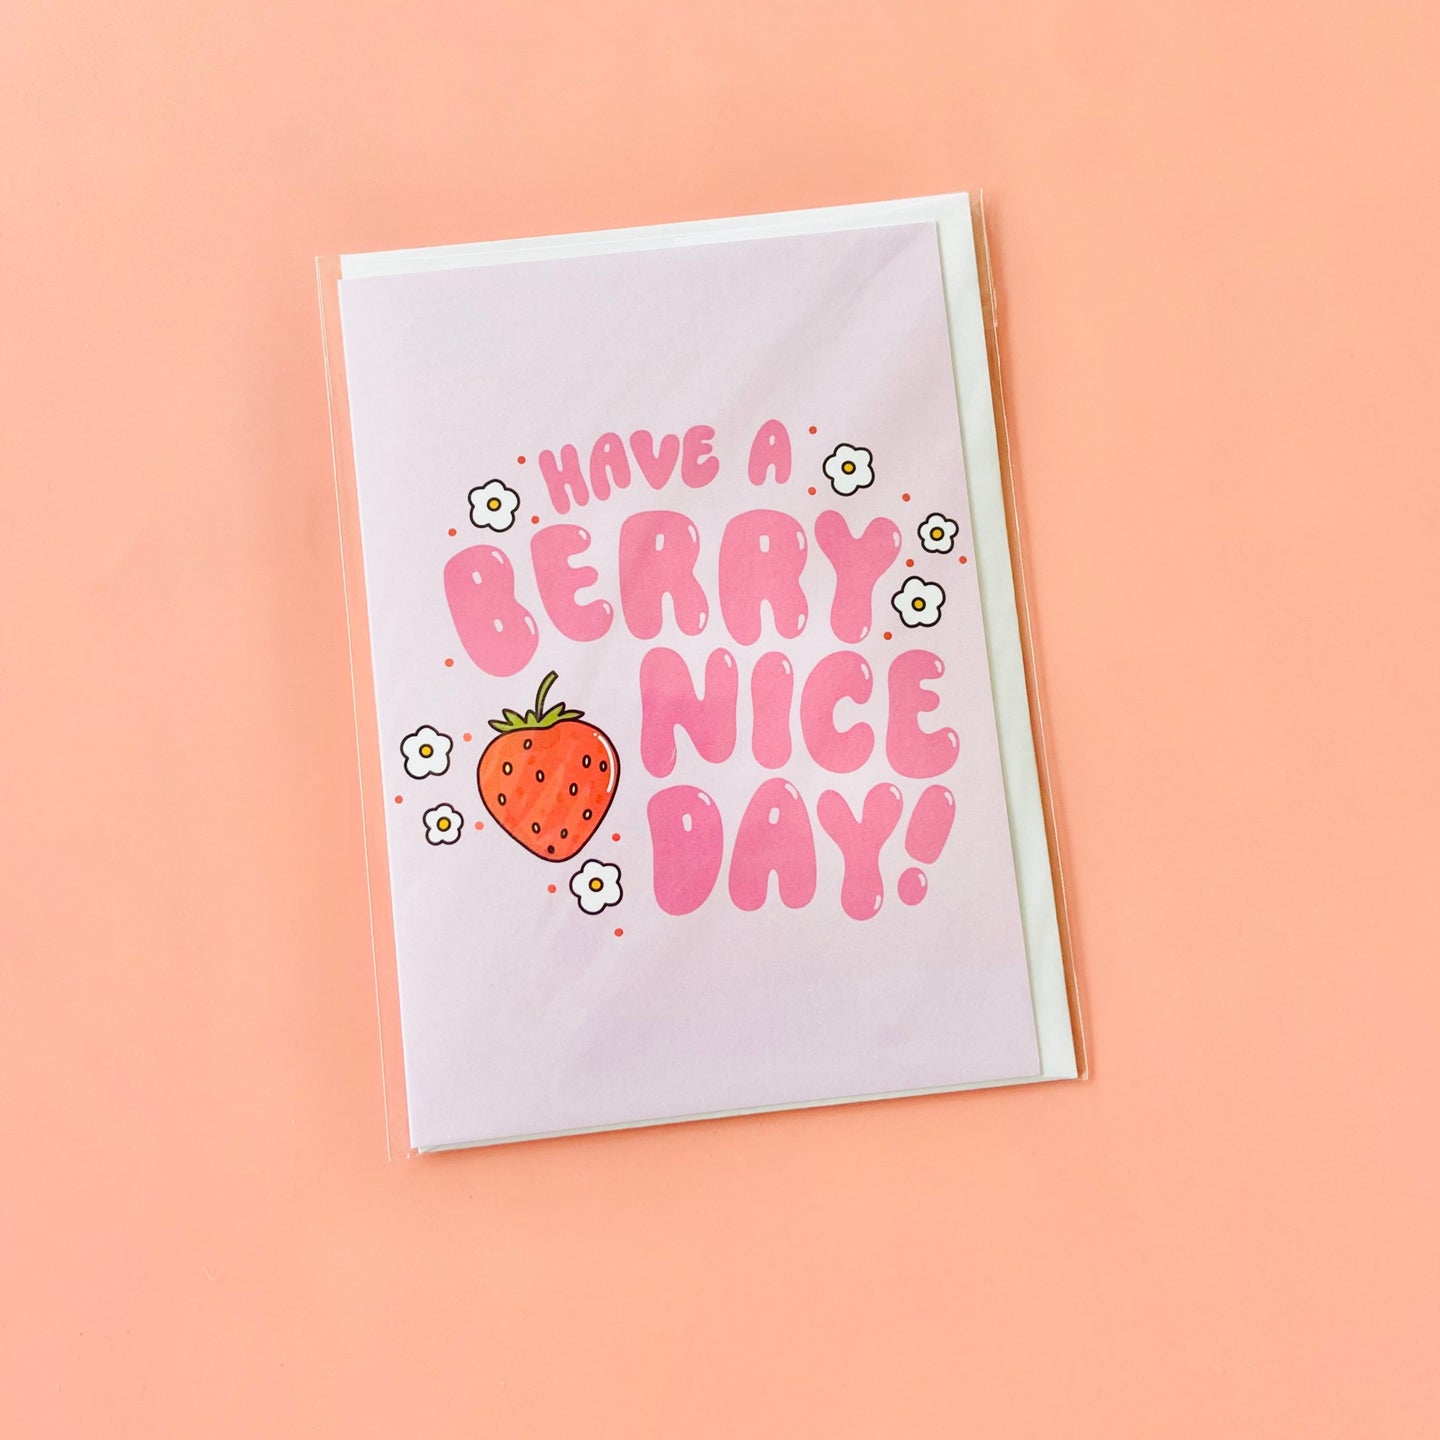 Berry Nice Day - Greeting Card